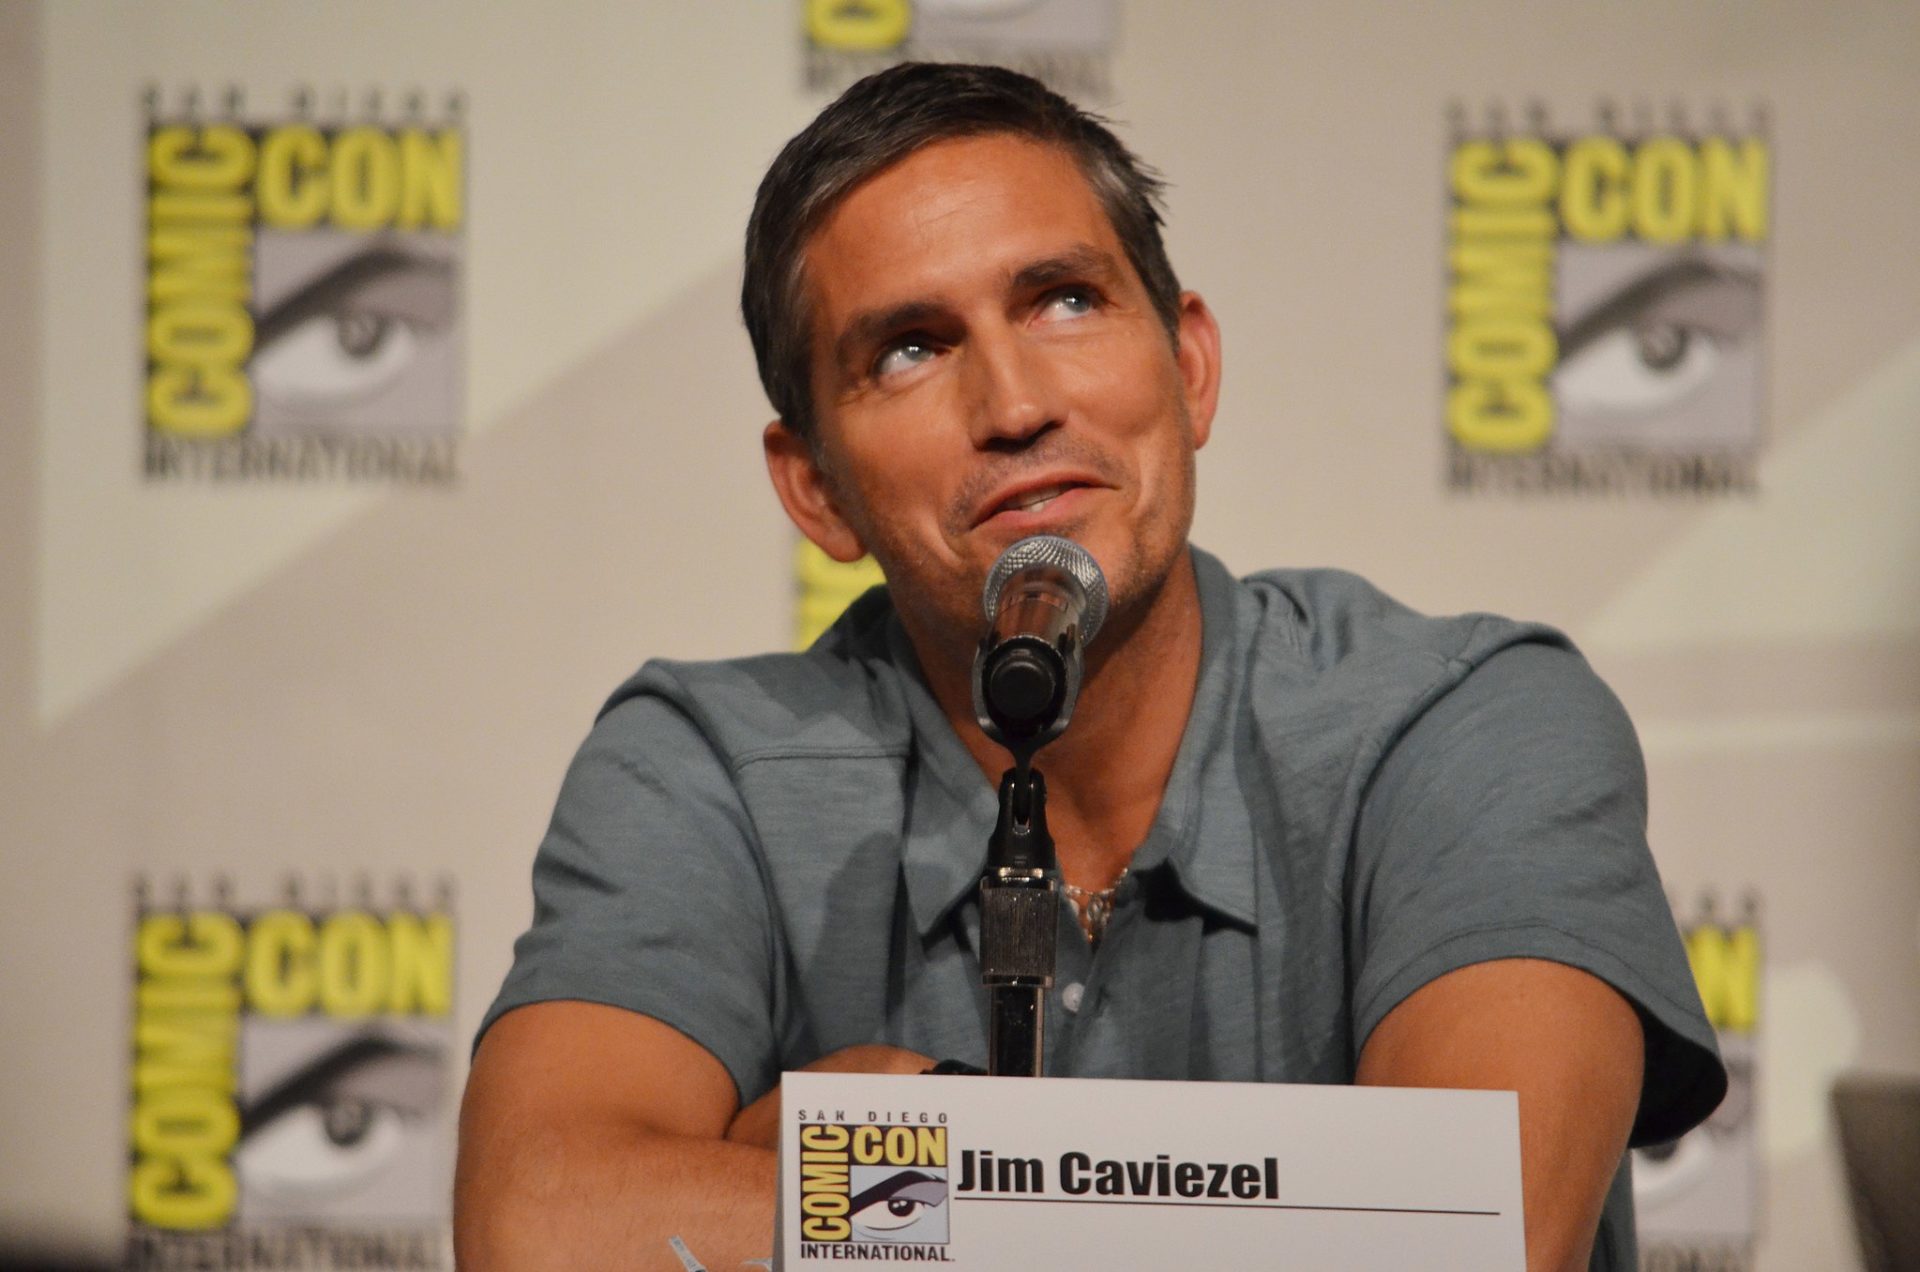 Jim Caviezel | Bild: Genevieve [CC BY 2.0 (https://creativecommons.org/licenses/by/2.0)]